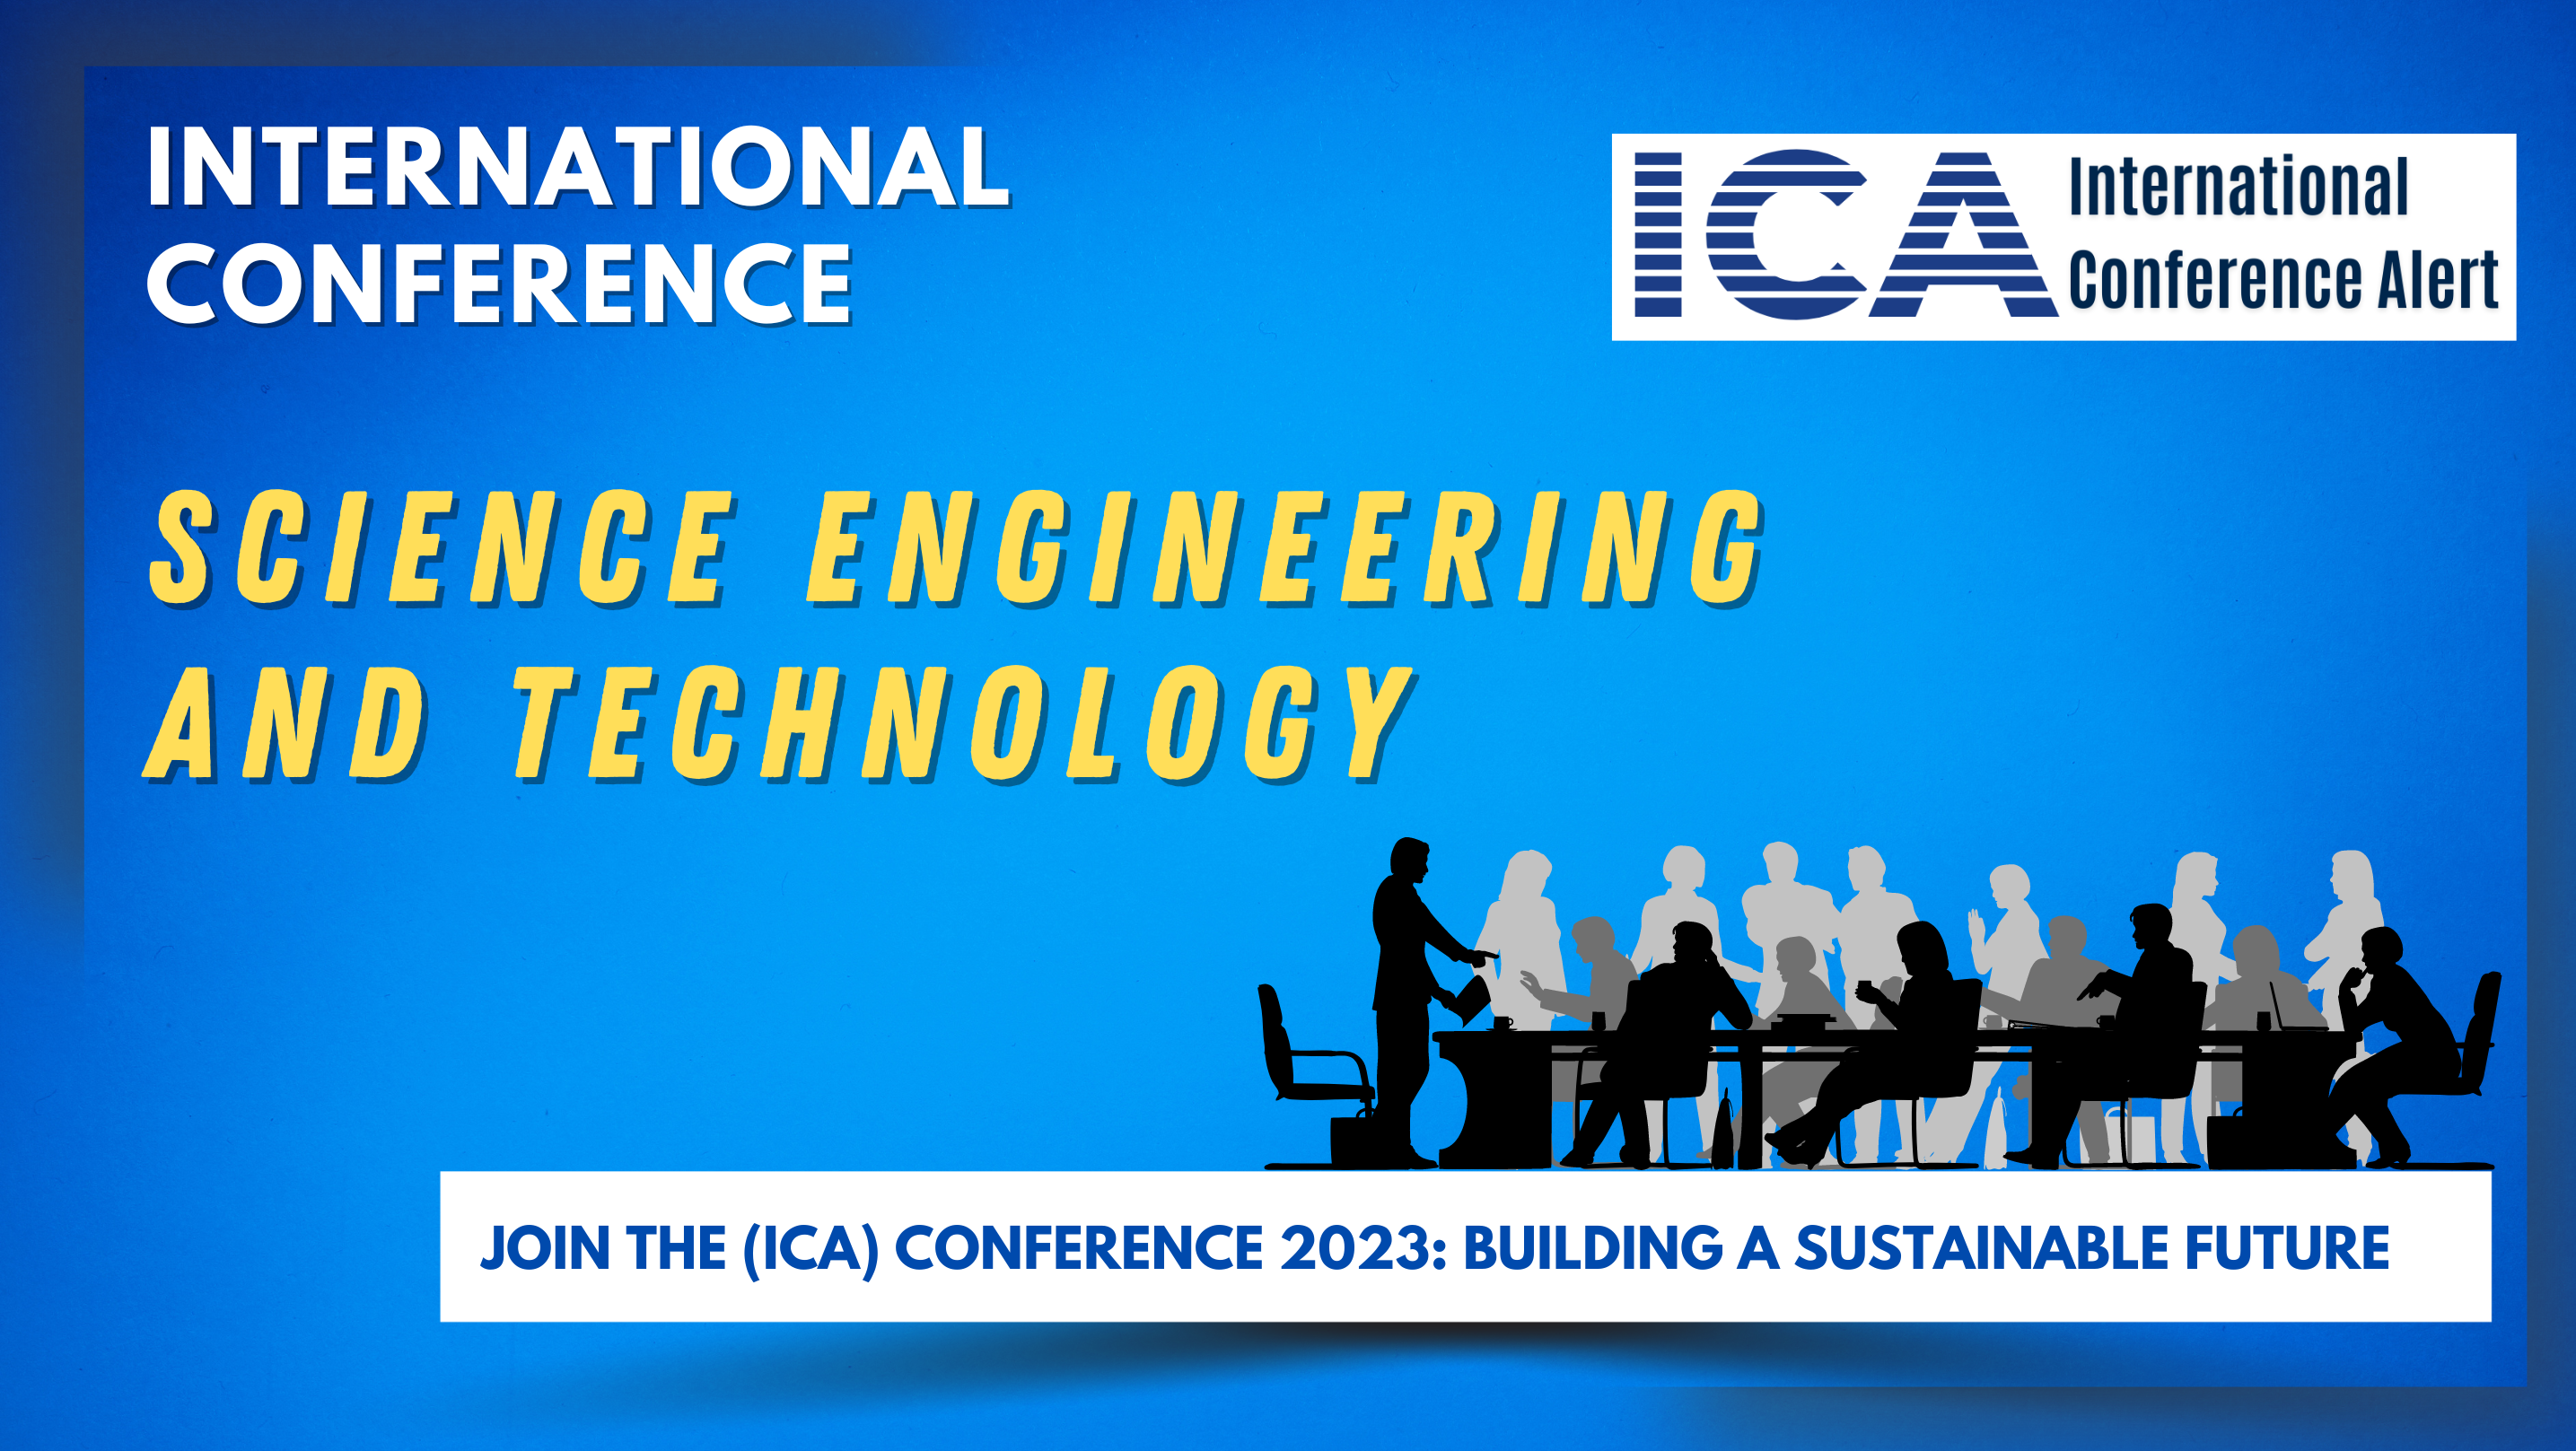 Join the (ICA) Conference 2023 Building a Sustainable Future